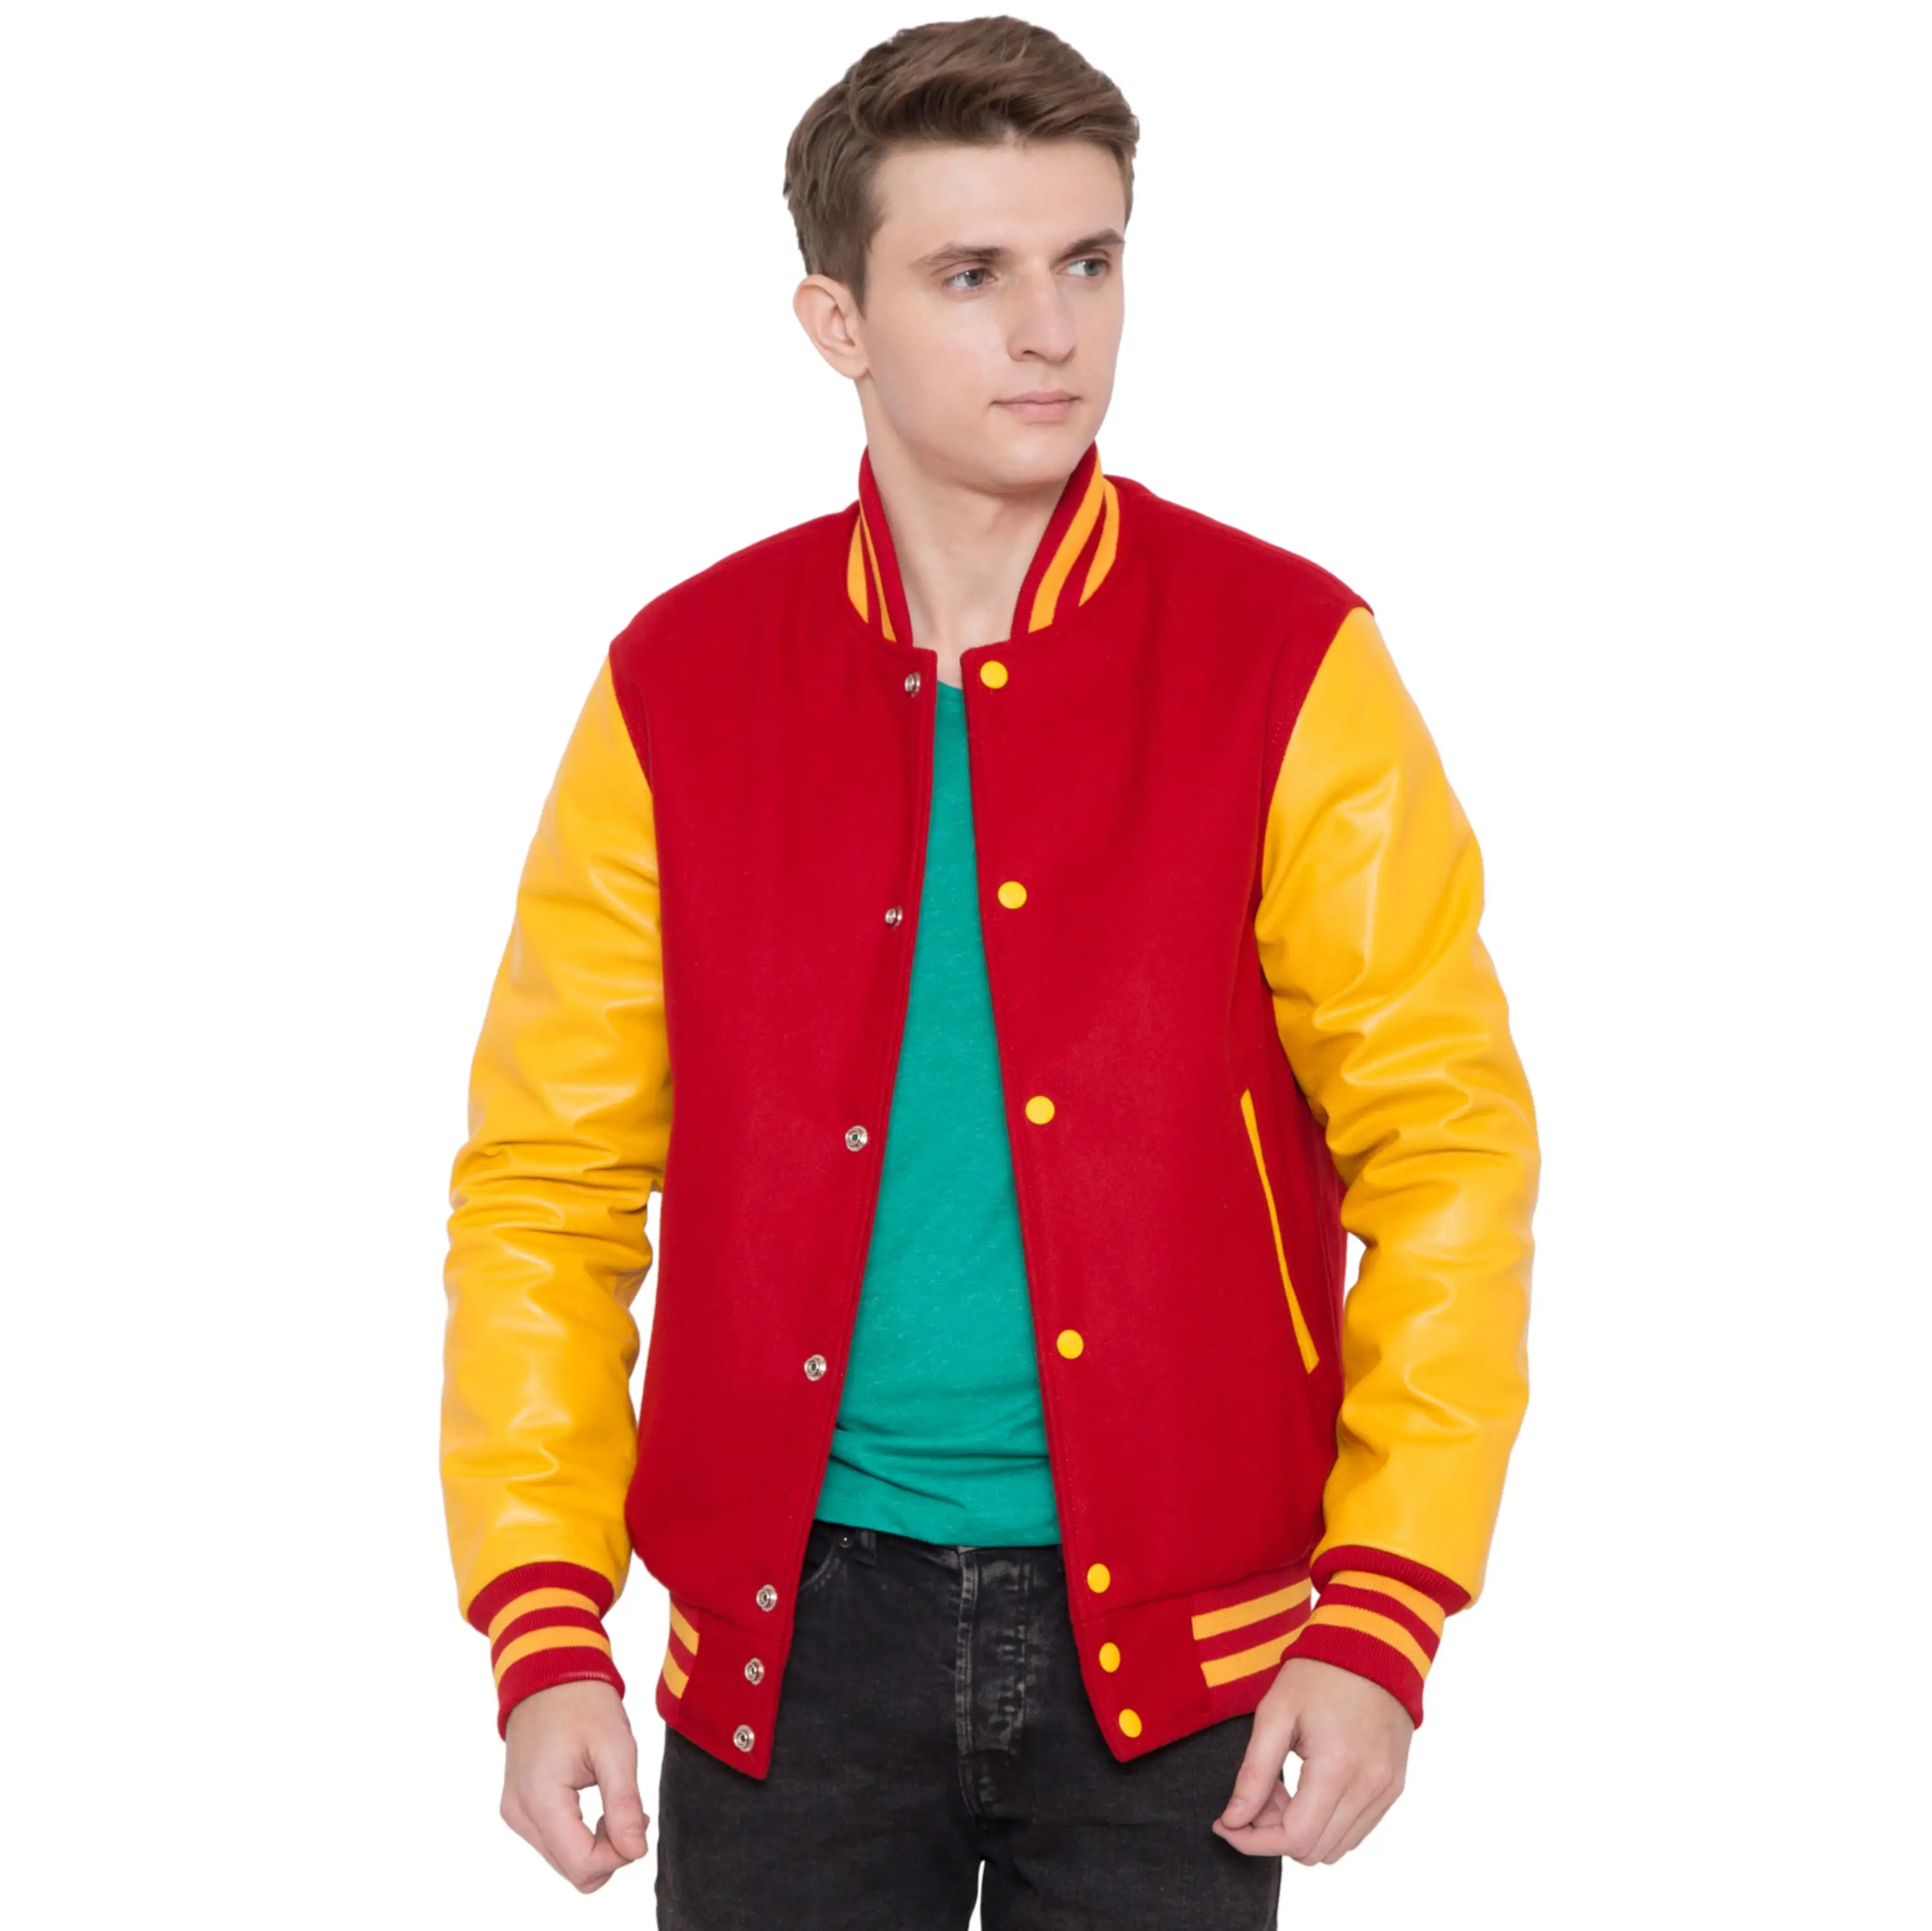 100% Cashmere Wool Body and Genuine Cowhide Leather Sleeves Red & Golden Yellow Letterman Varsity Jacket